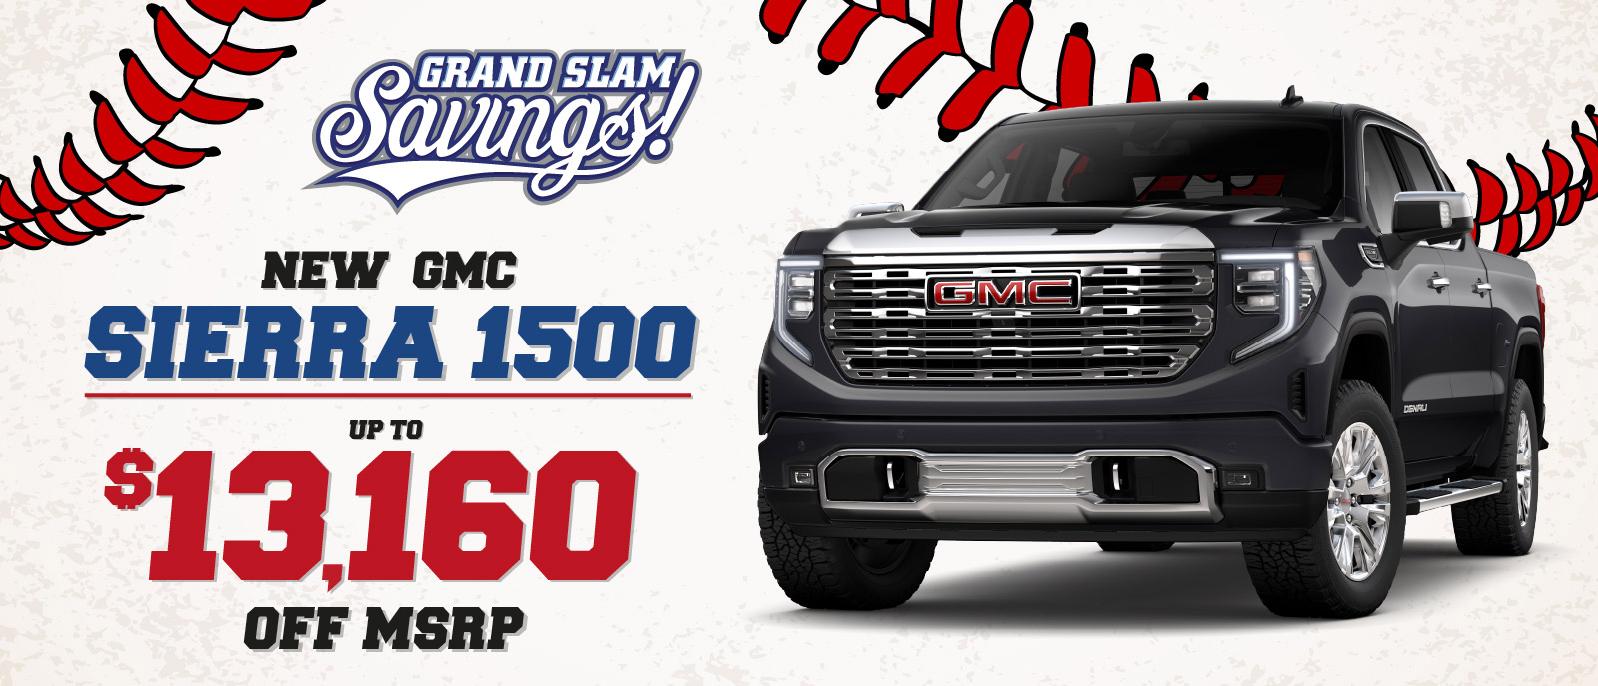 New GMC Sierra 1500 - save up to $13,160off MSRP